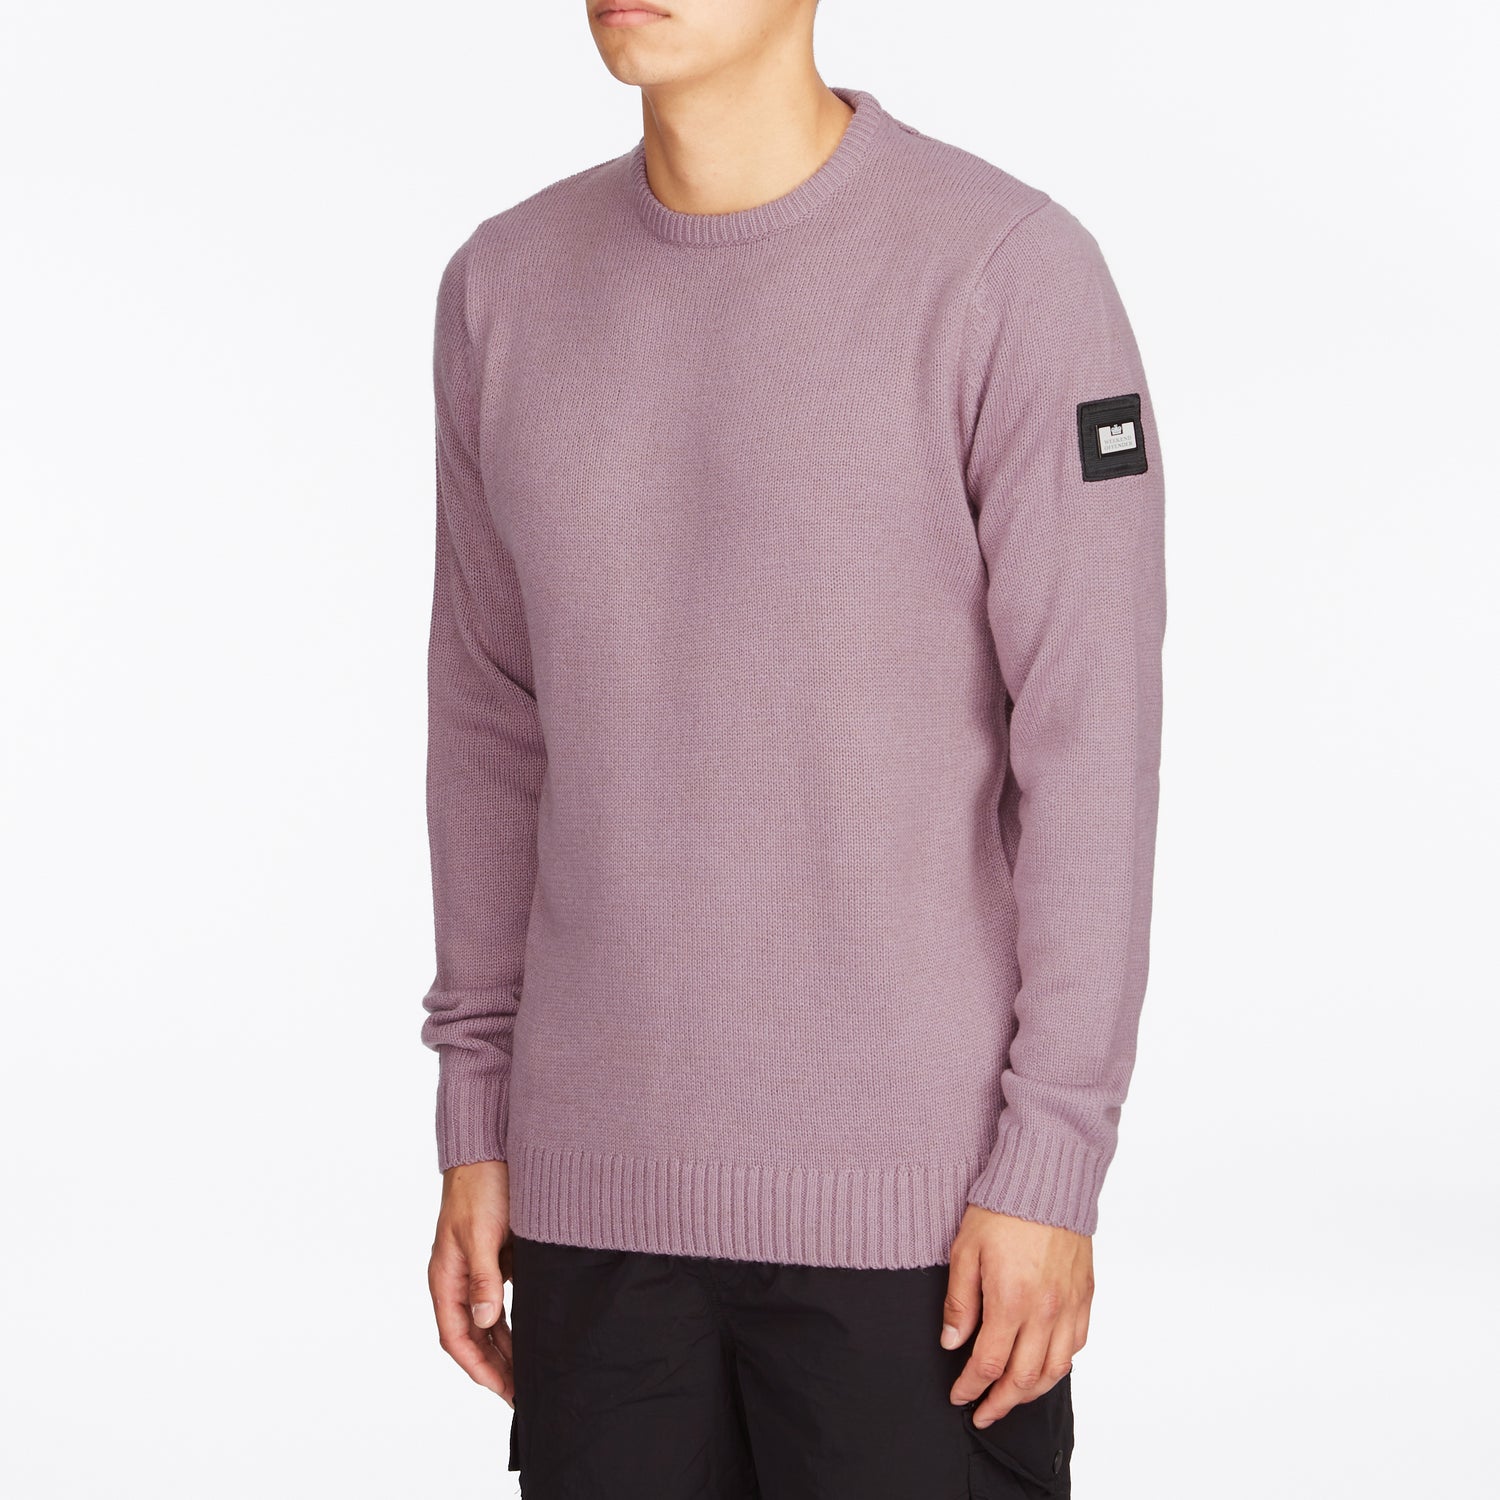 Weekend Offender Knitted Fishermans Crewneck Sweater - Cardona